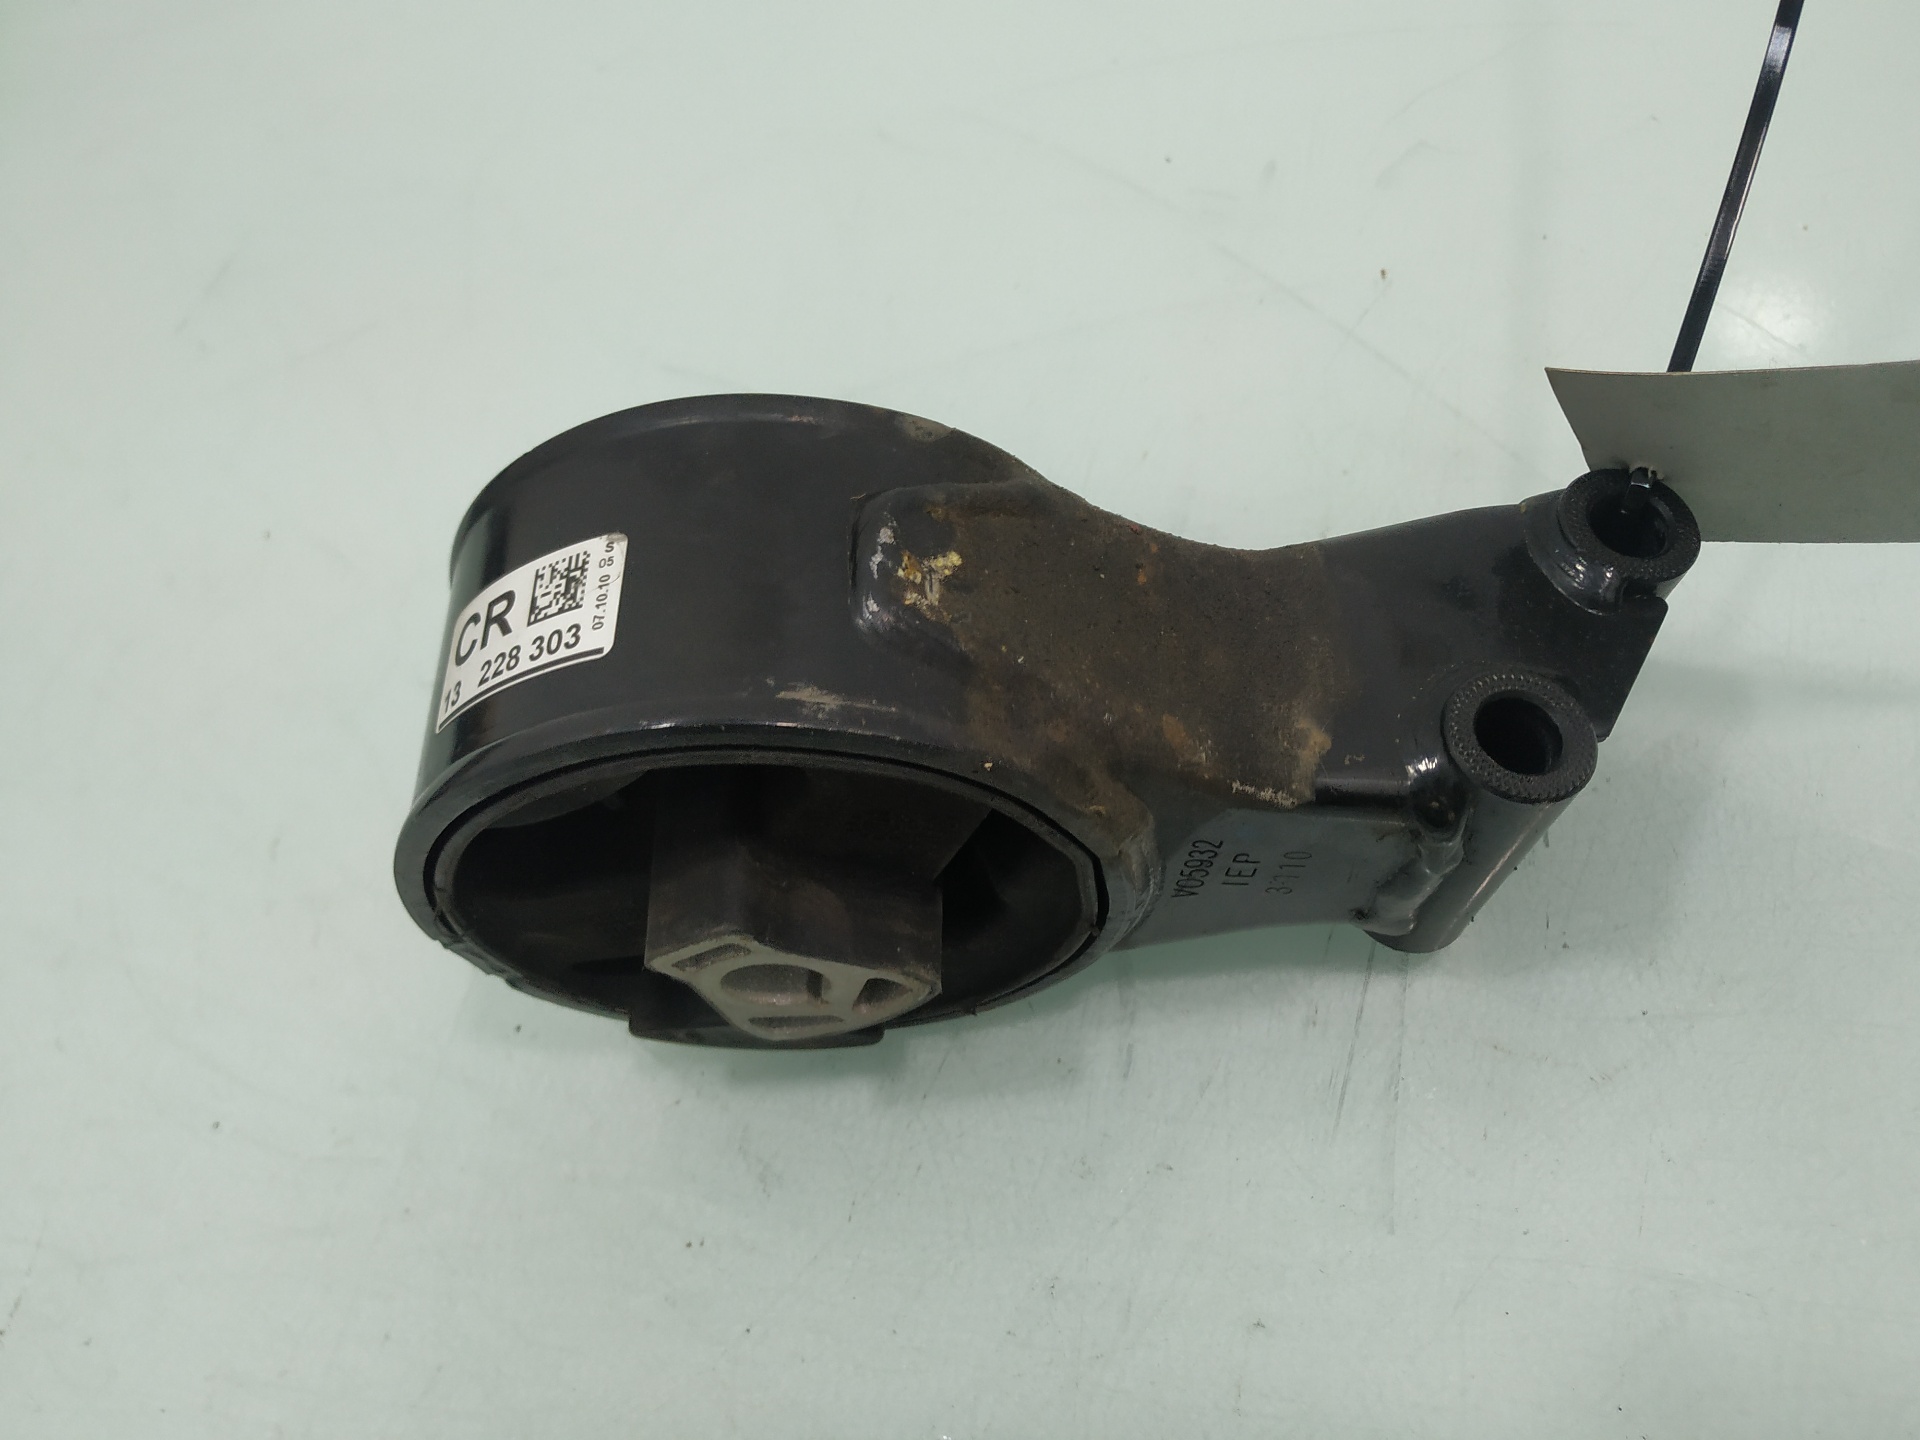 OPEL Insignia A (2008-2016) Other Engine Compartment Parts 13228303 24854945